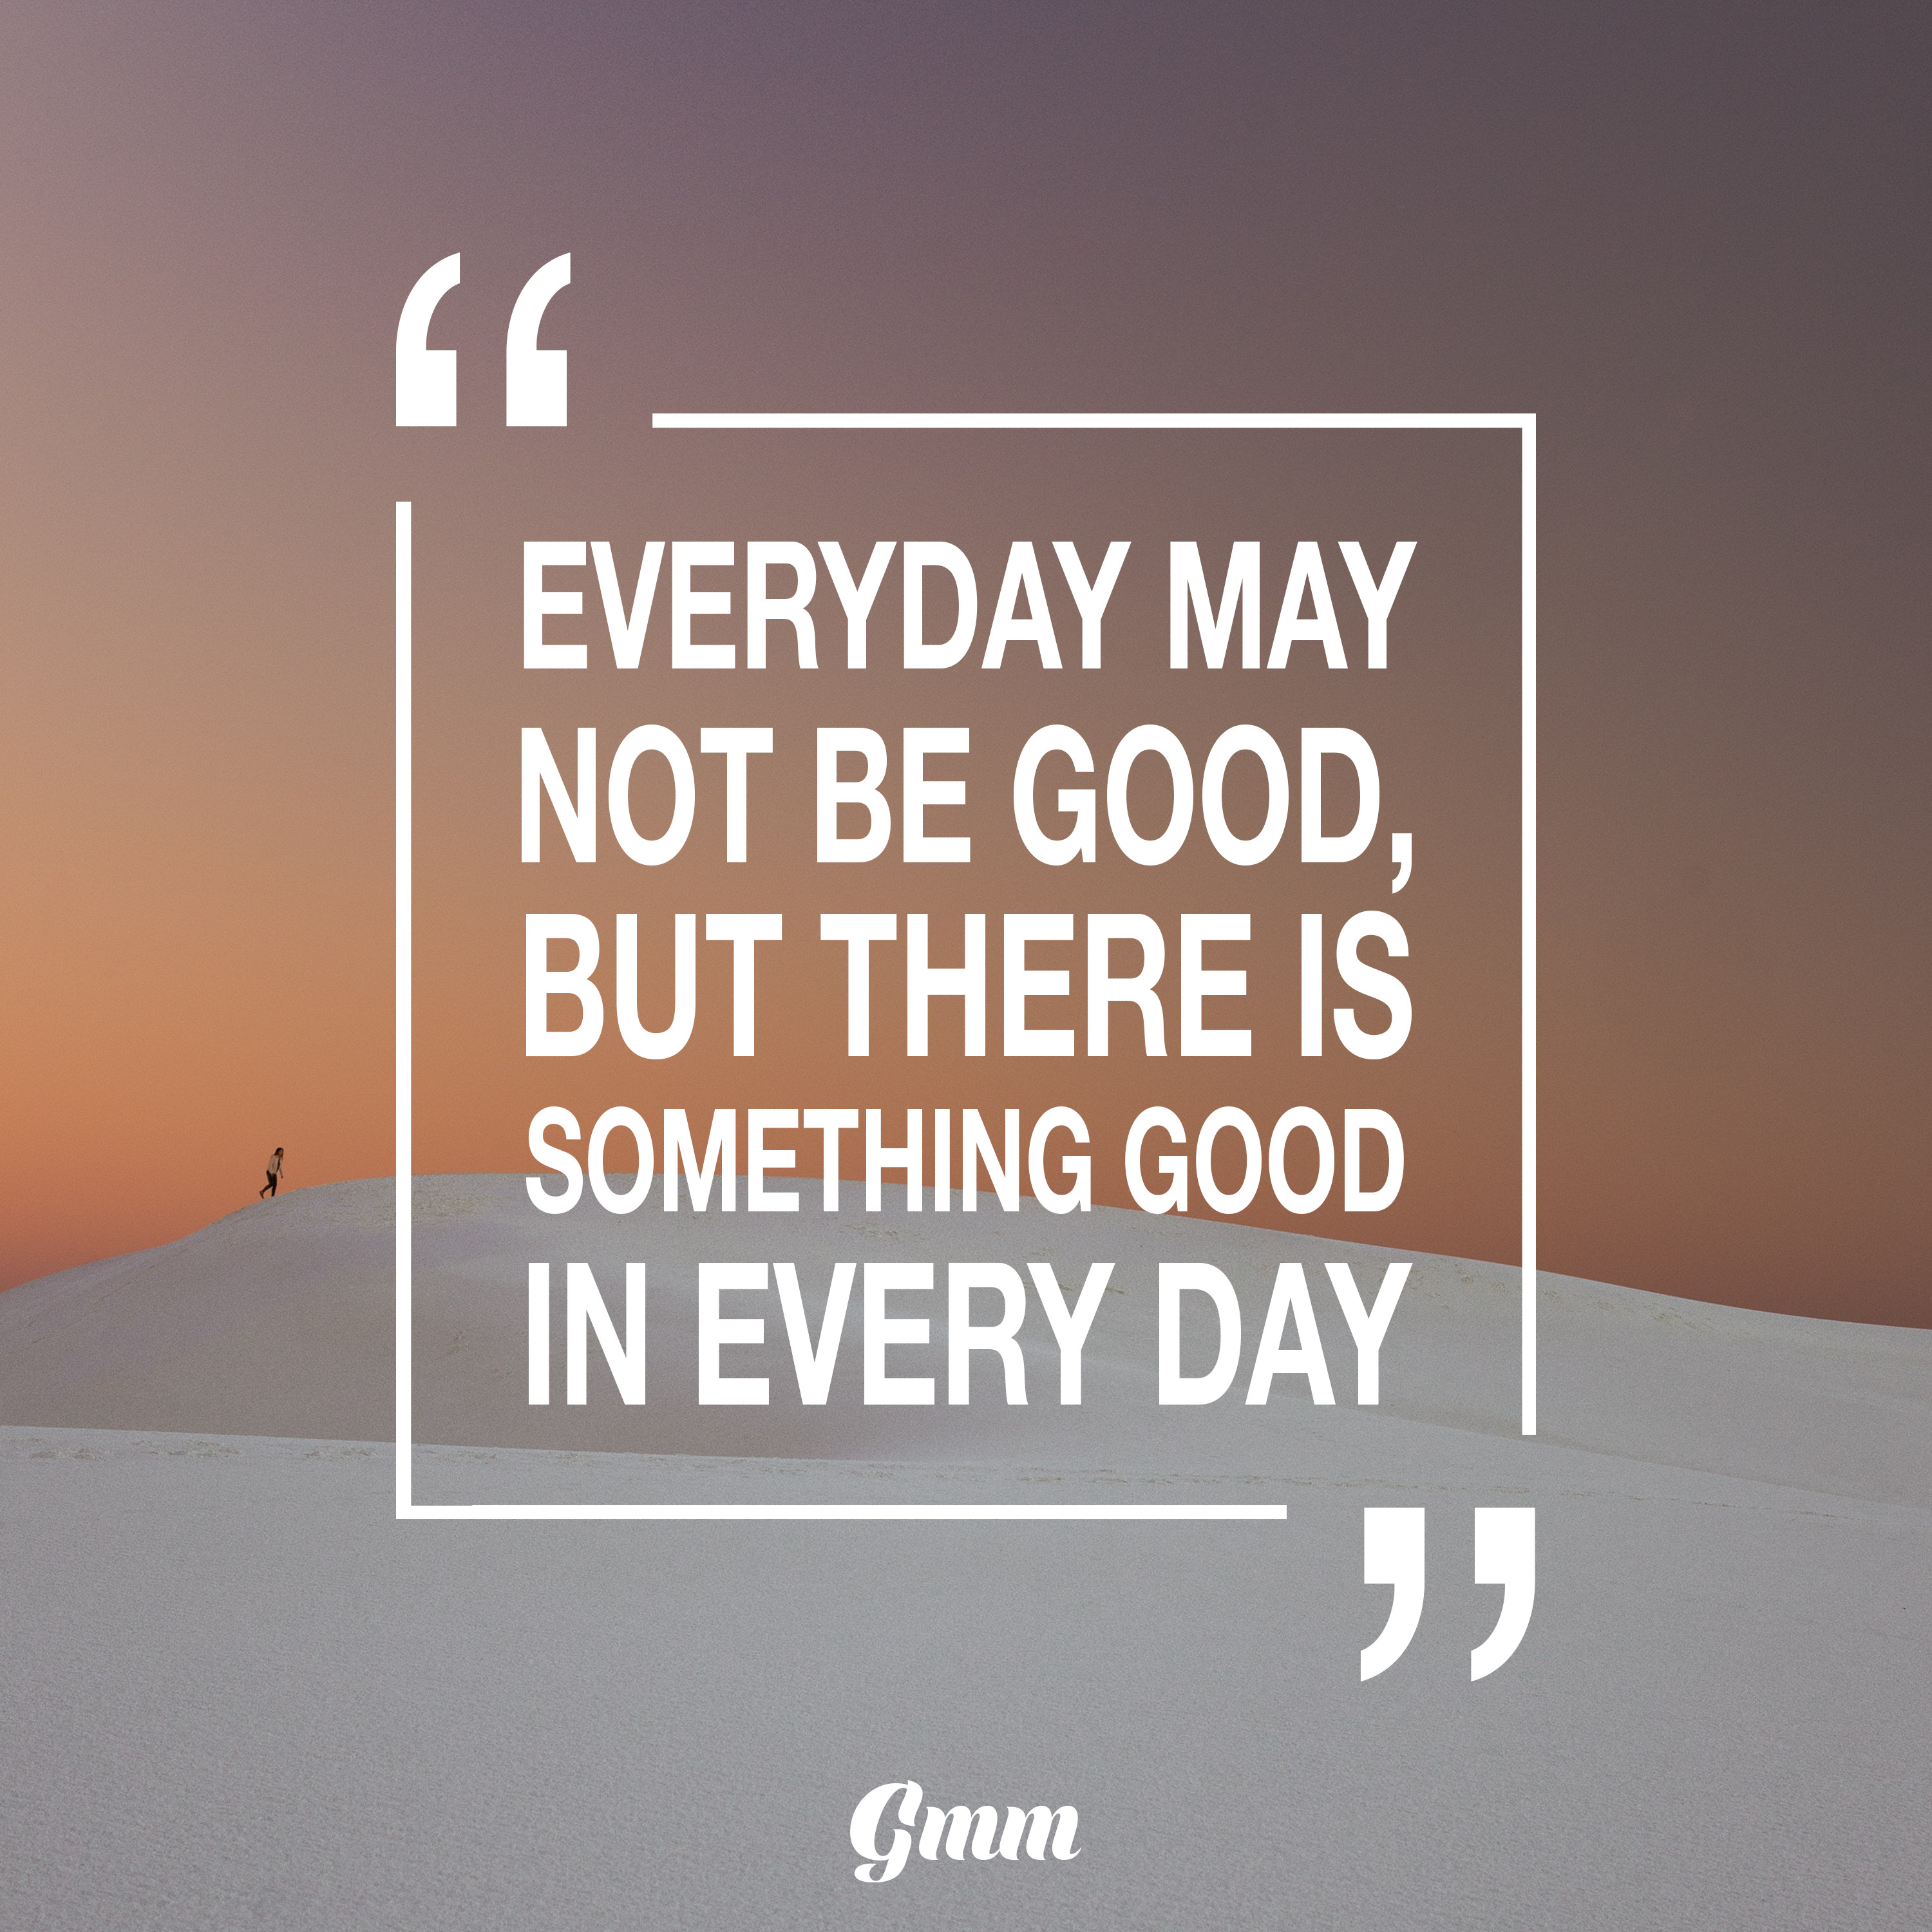 Everyday Motivational Quotes
 Everyday may not be good but there is something good in